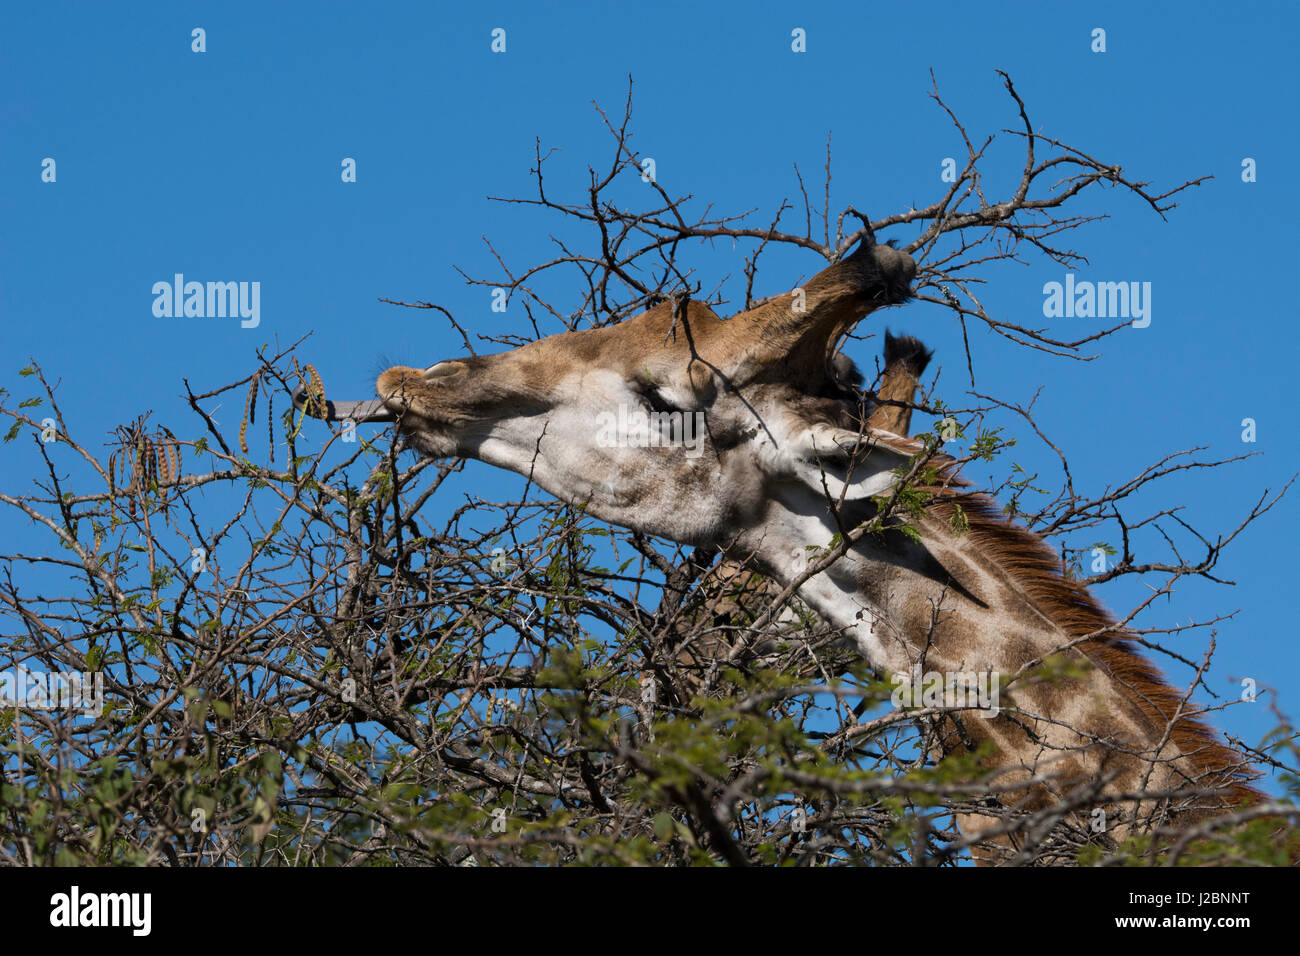 South Africa, Durban, Tala Game Reserve. Giraffe, head detail eating thorny acacia tree with long tongue. Stock Photo